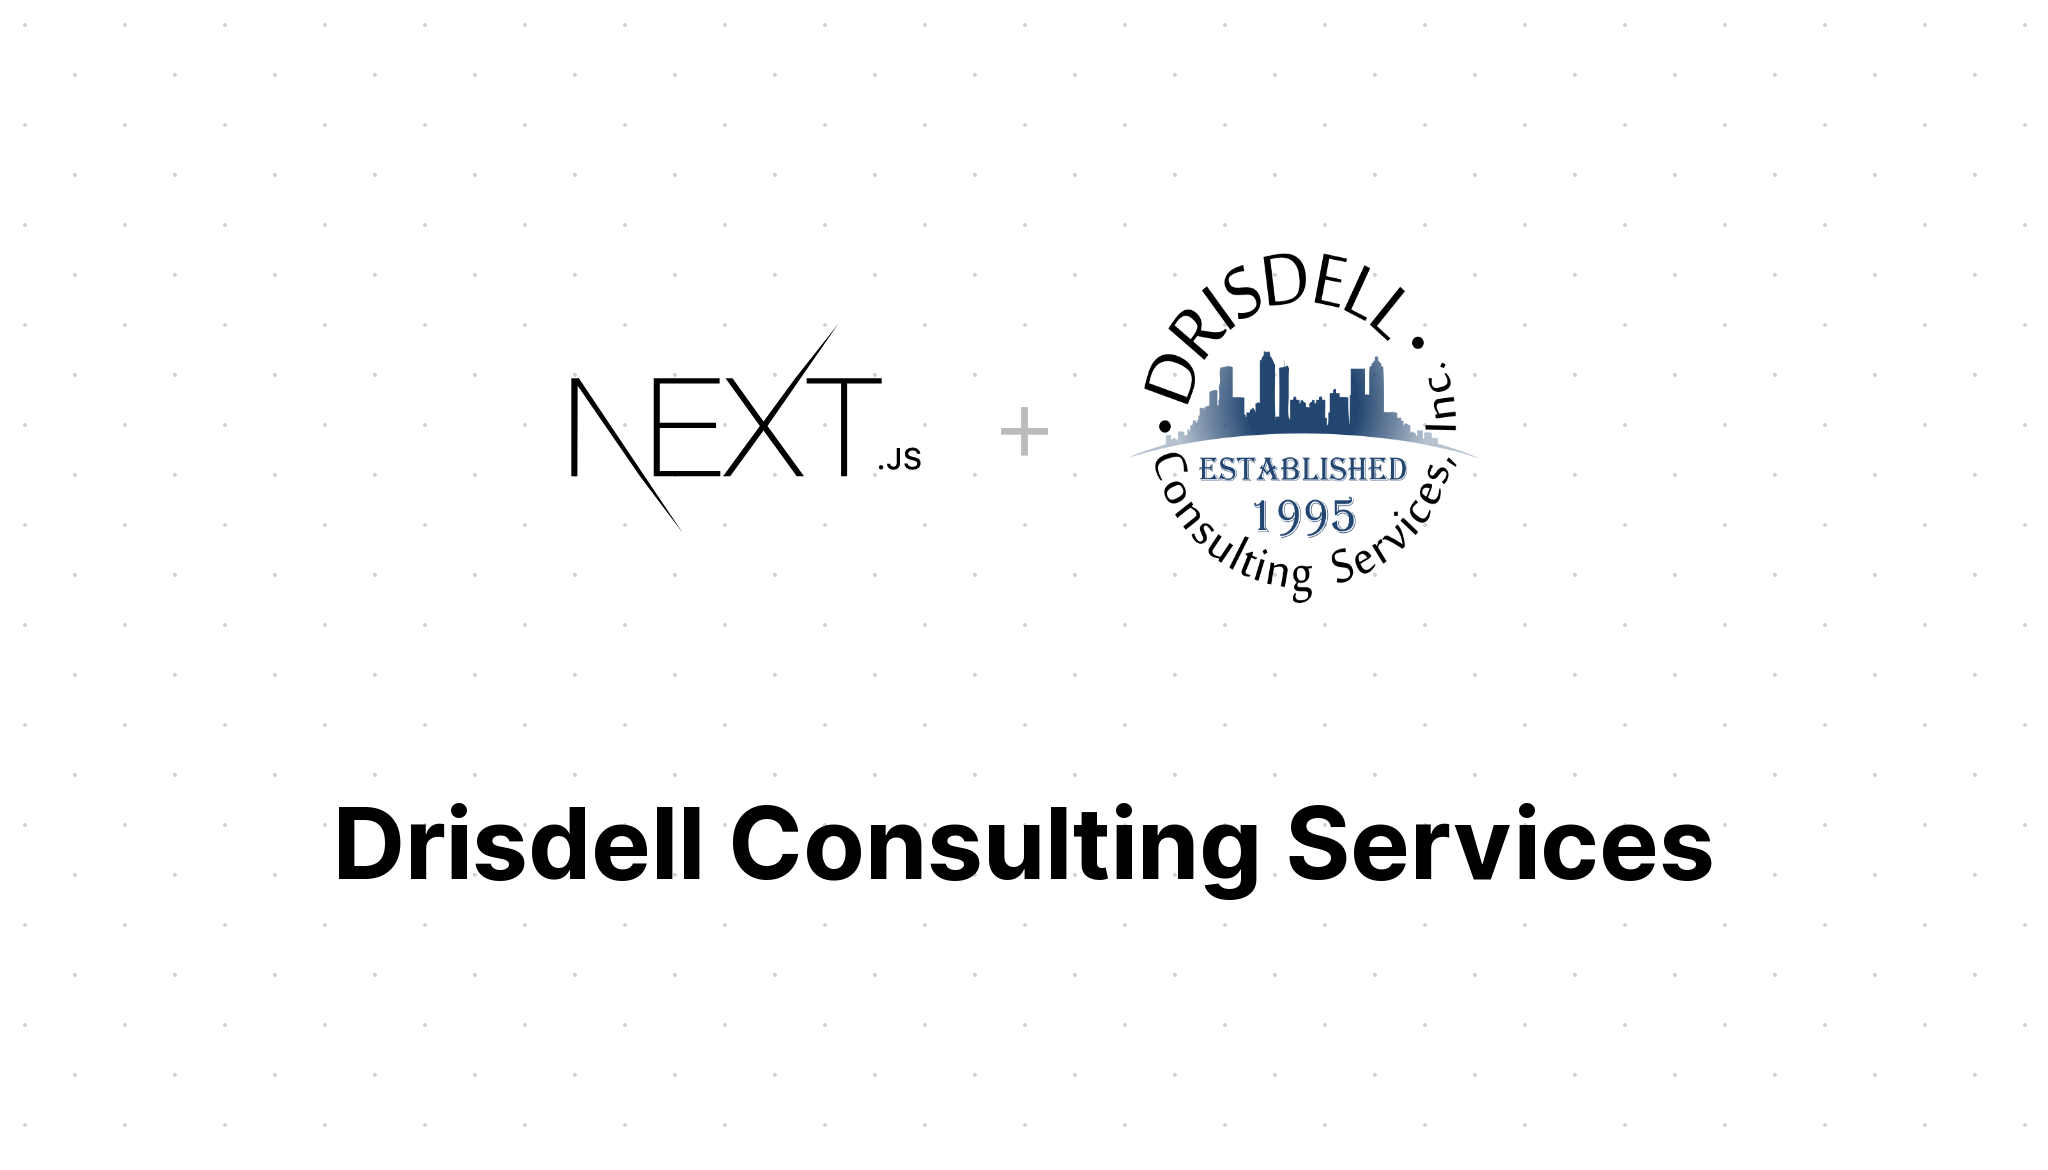 Cover Image for Drisdell Consulting